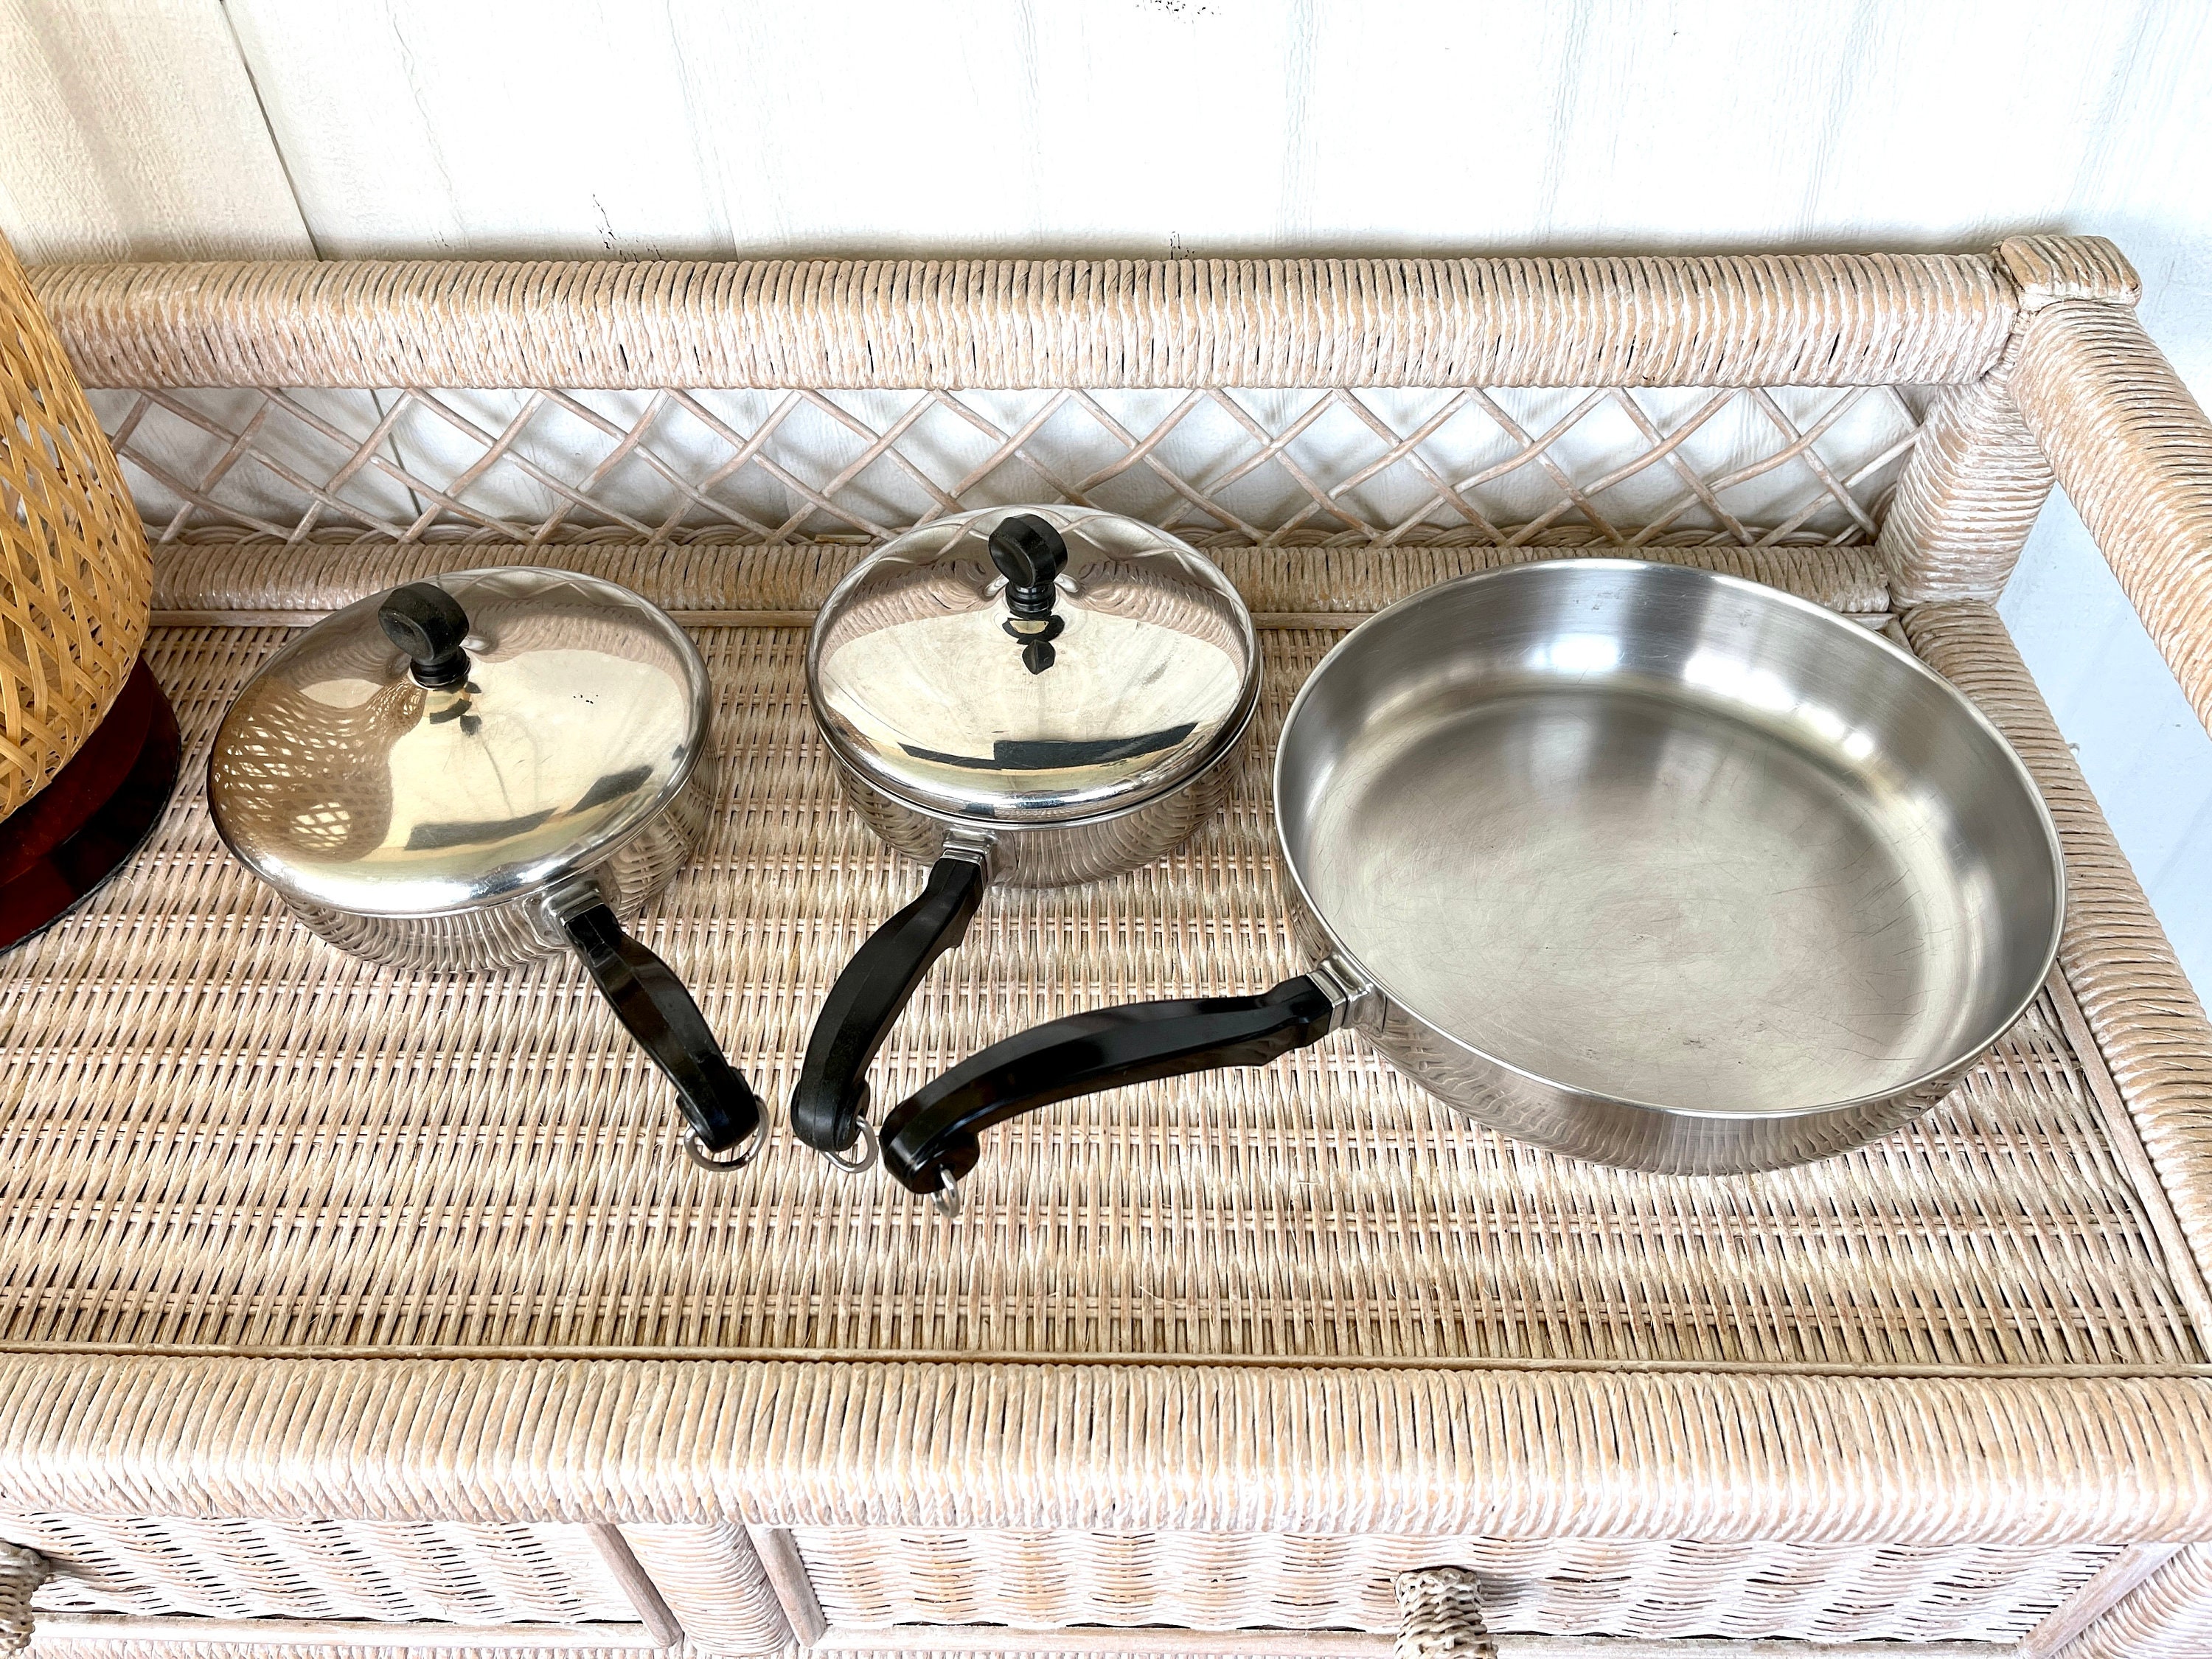 Vintage 1960s Atomic Starburst Wear-ever Mid Century Modern Pots and Pans  Stainless Inner Clad Aluminum Lid Replacements 